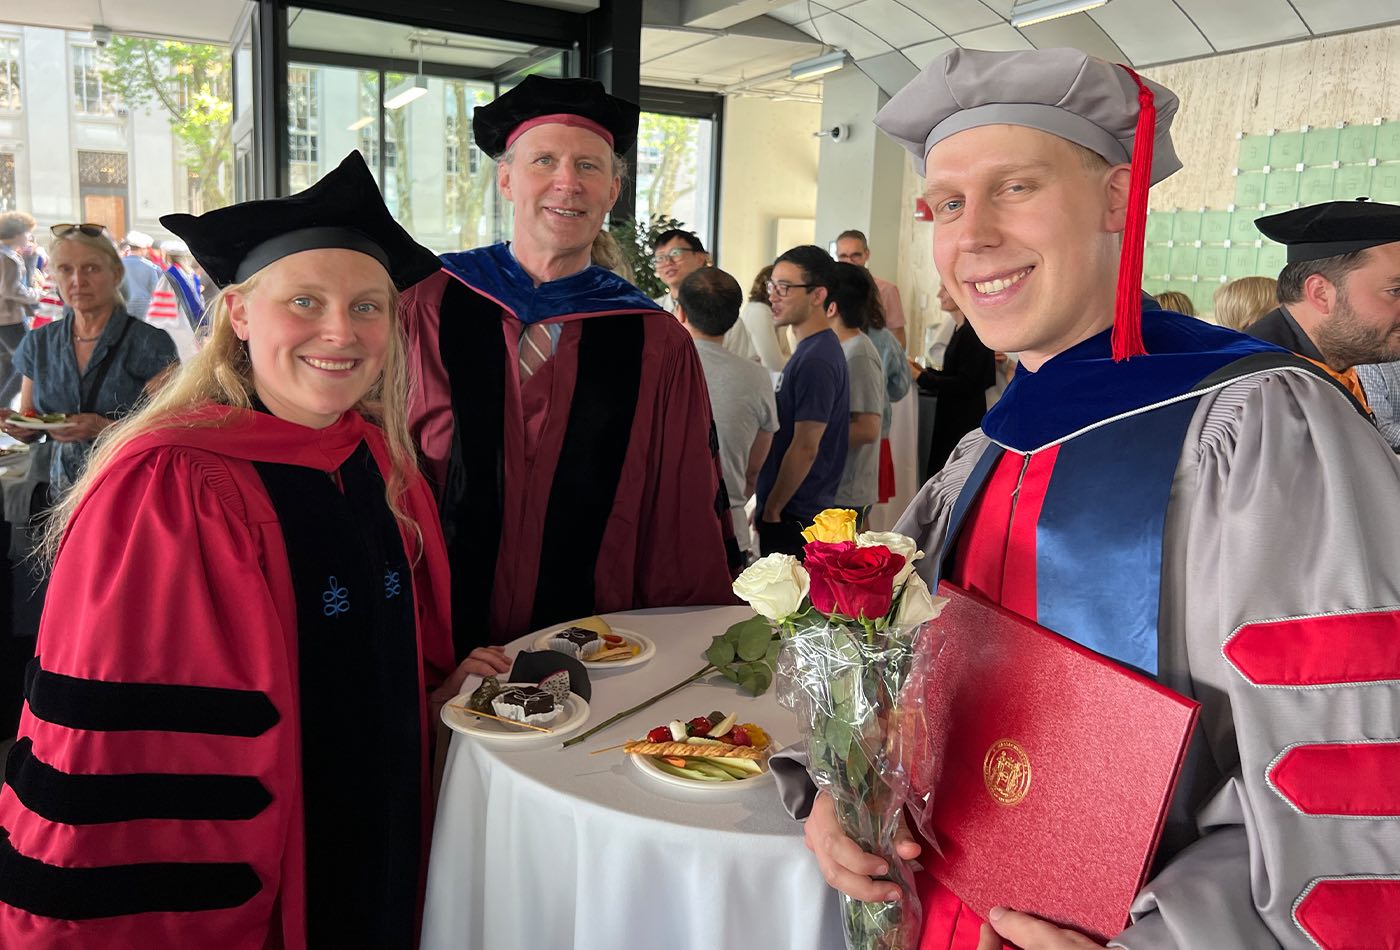 Cole Perkinson and his guests, all in PhD regalia, enjoy refreshments at the reception.